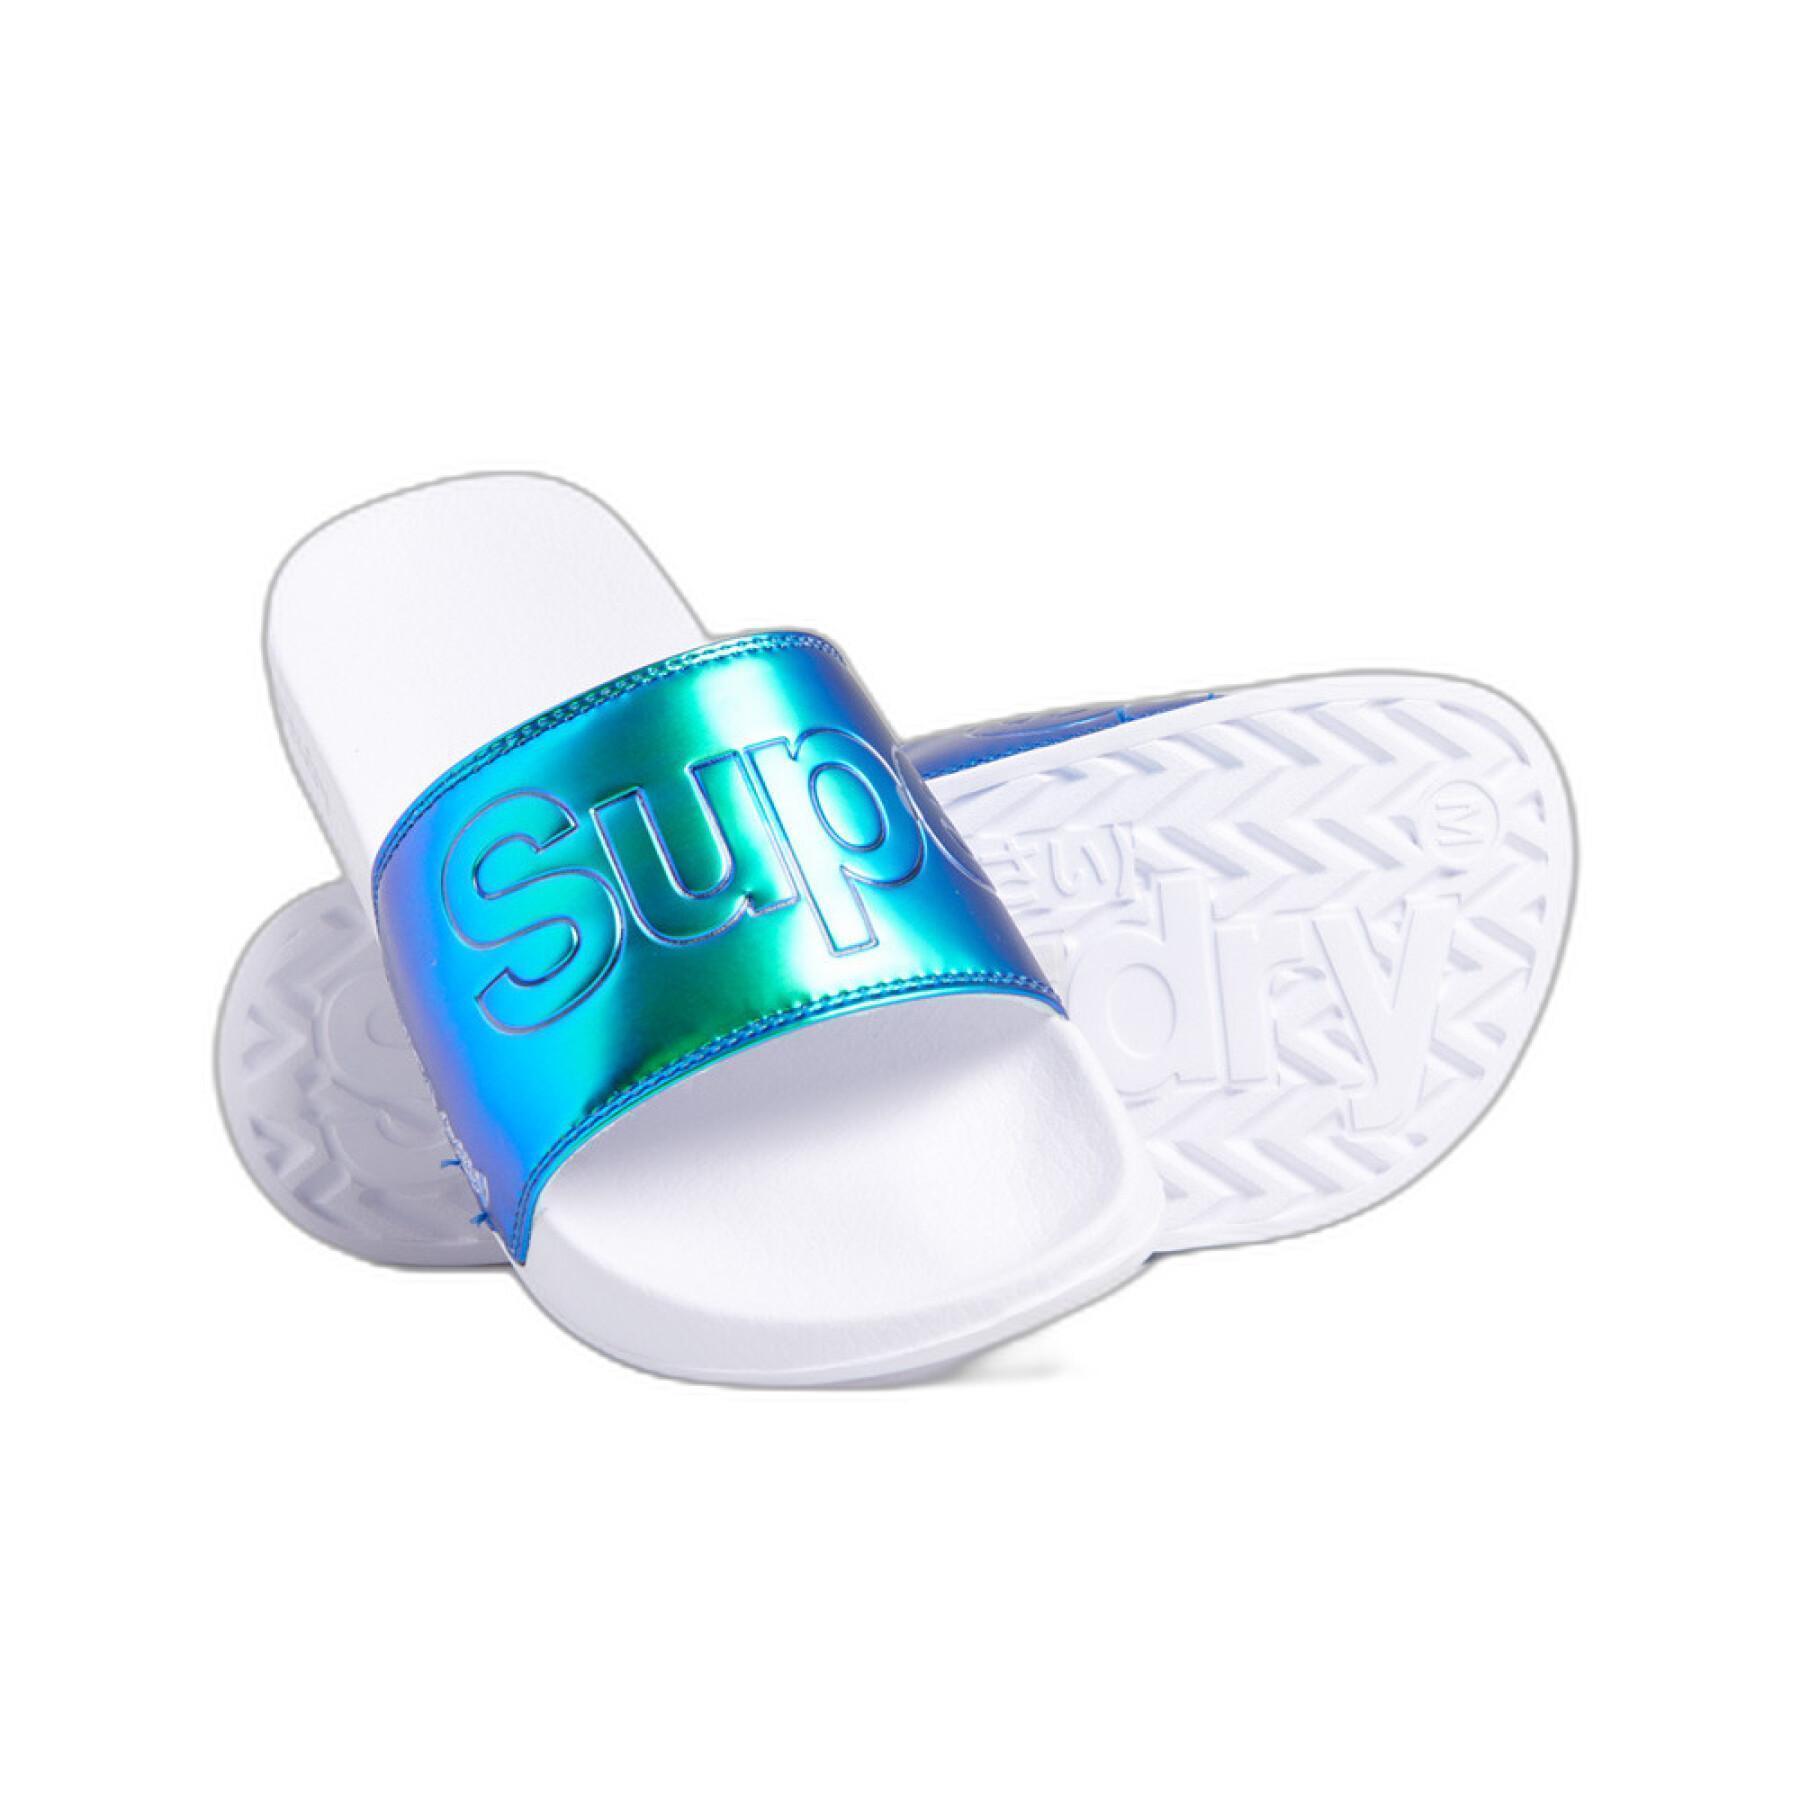 Women's swimming pool slippers Superdry